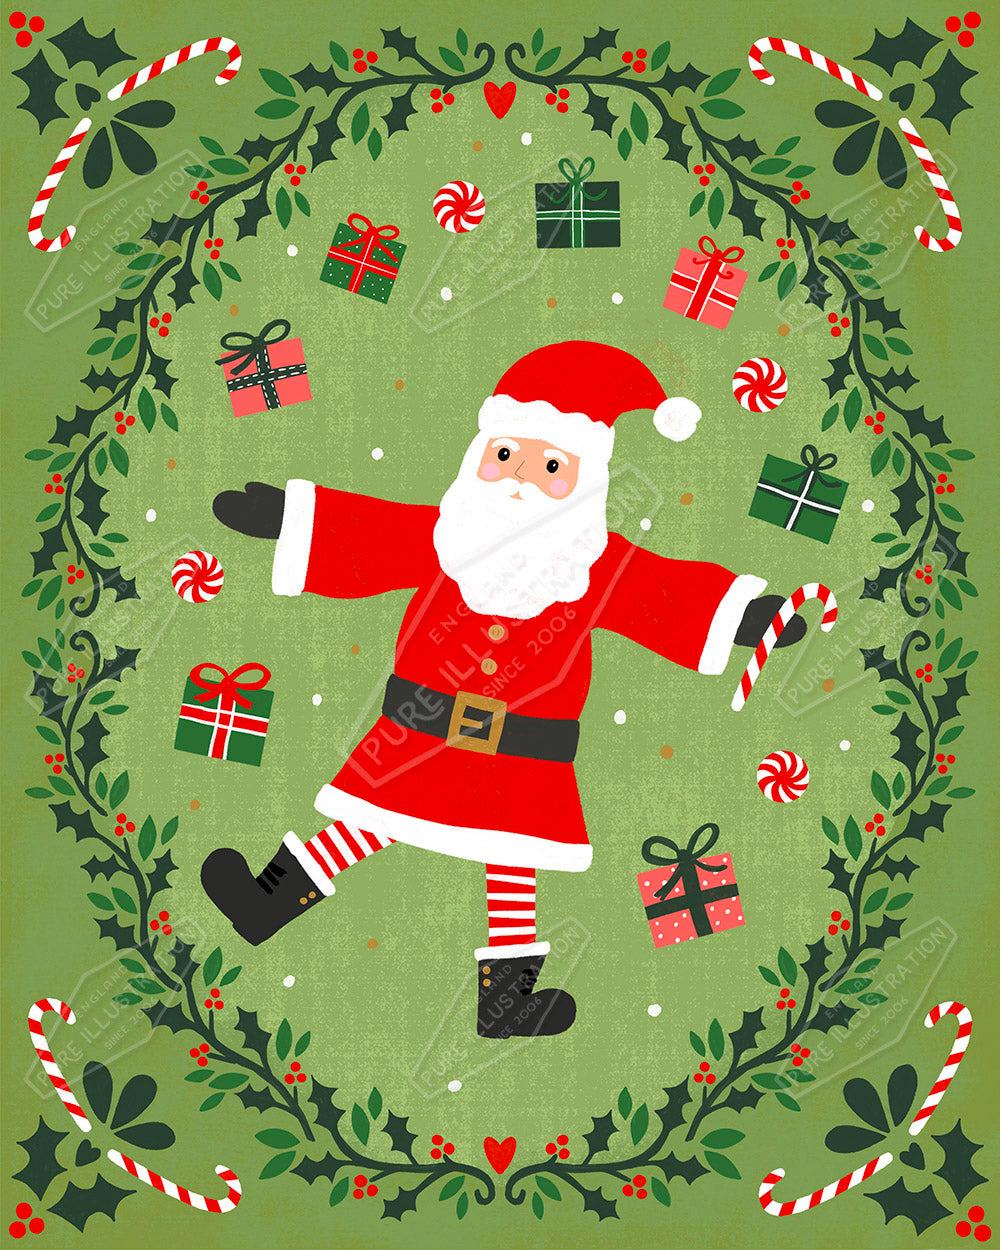 Santa / Father Christmas Illustration by Sian Summerhayes for Pure Art Licensing & Surface Design Agency